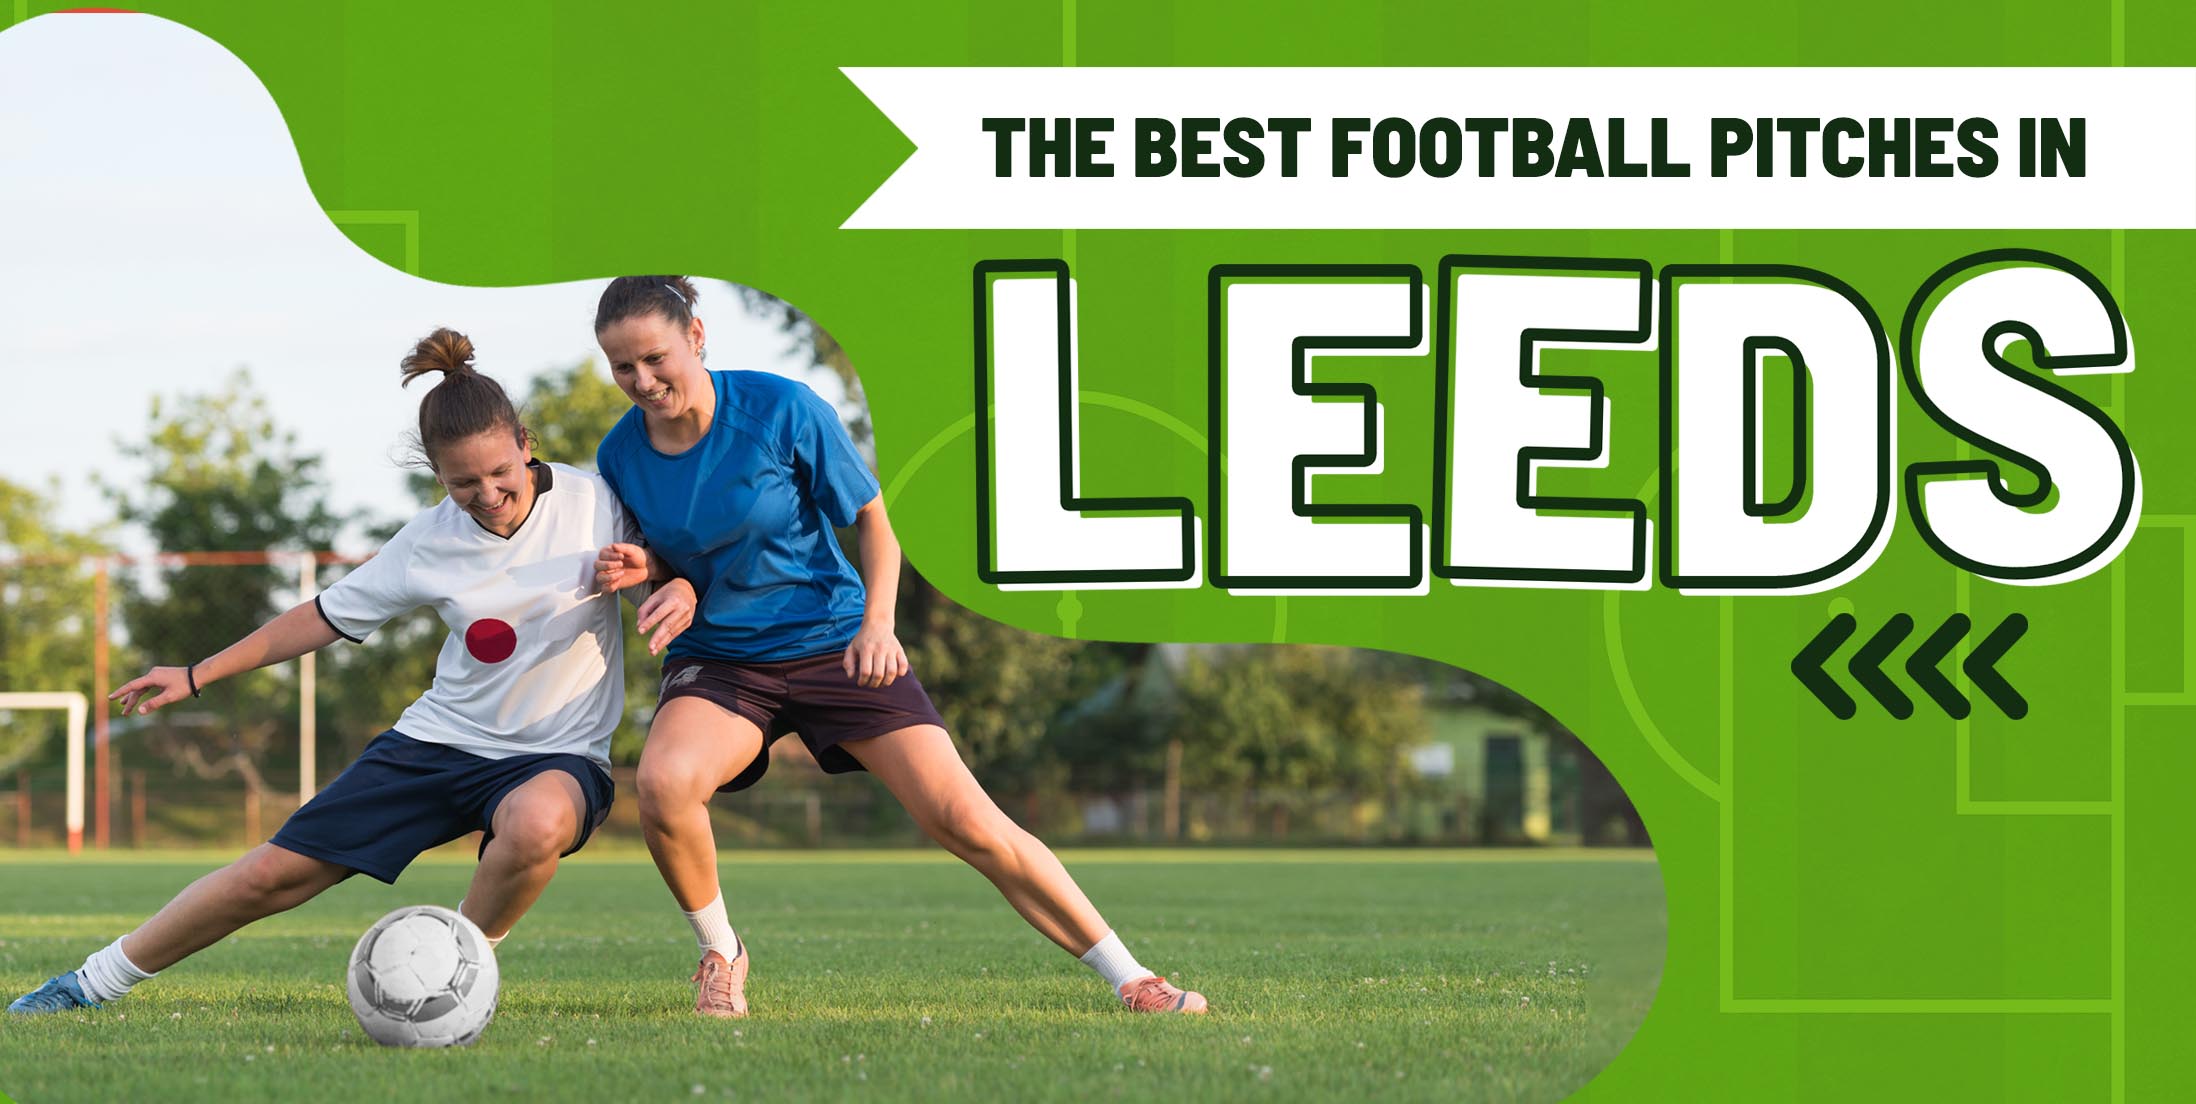 Best Football Pitches in Leeds